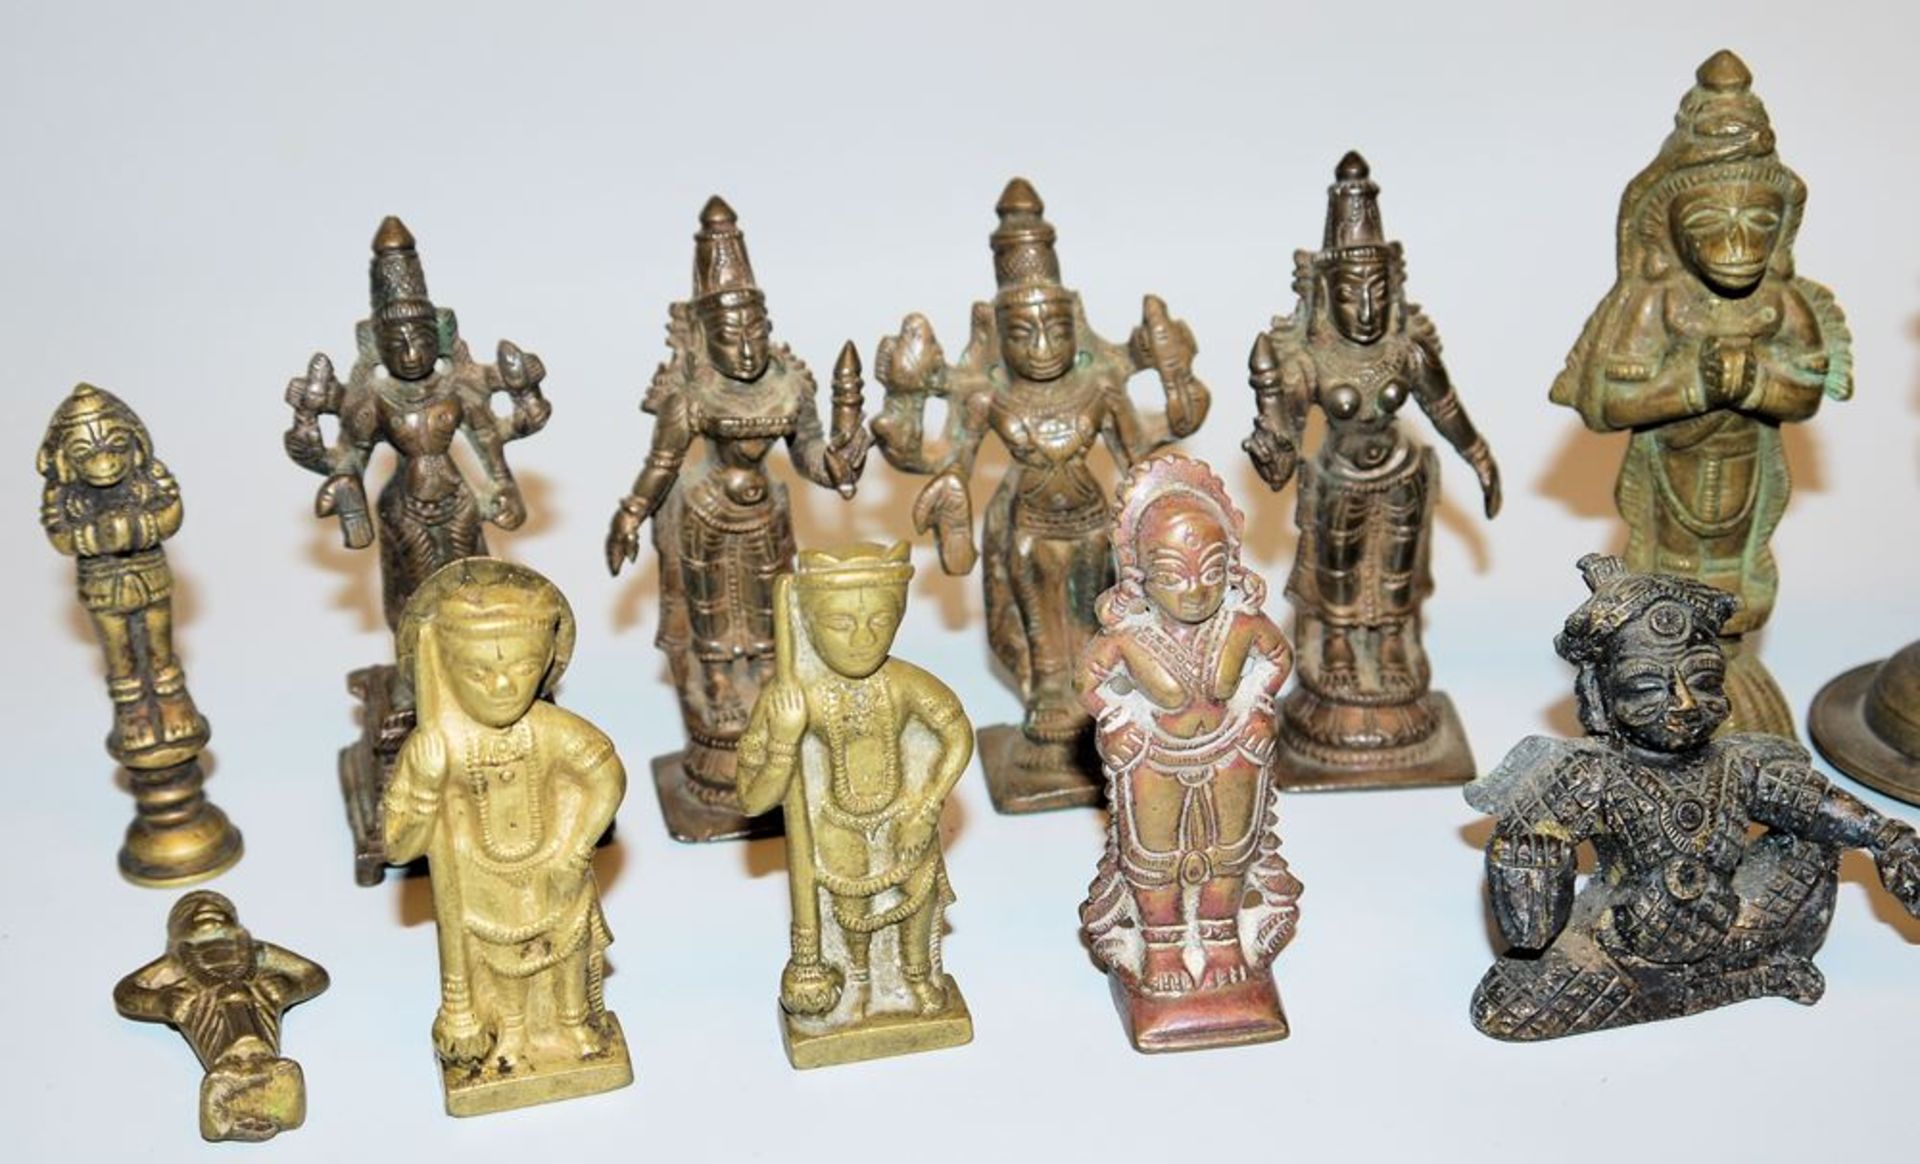 22 small bronzes of Hindu folk and high deities, India, 19th & 20th c. - Image 2 of 3